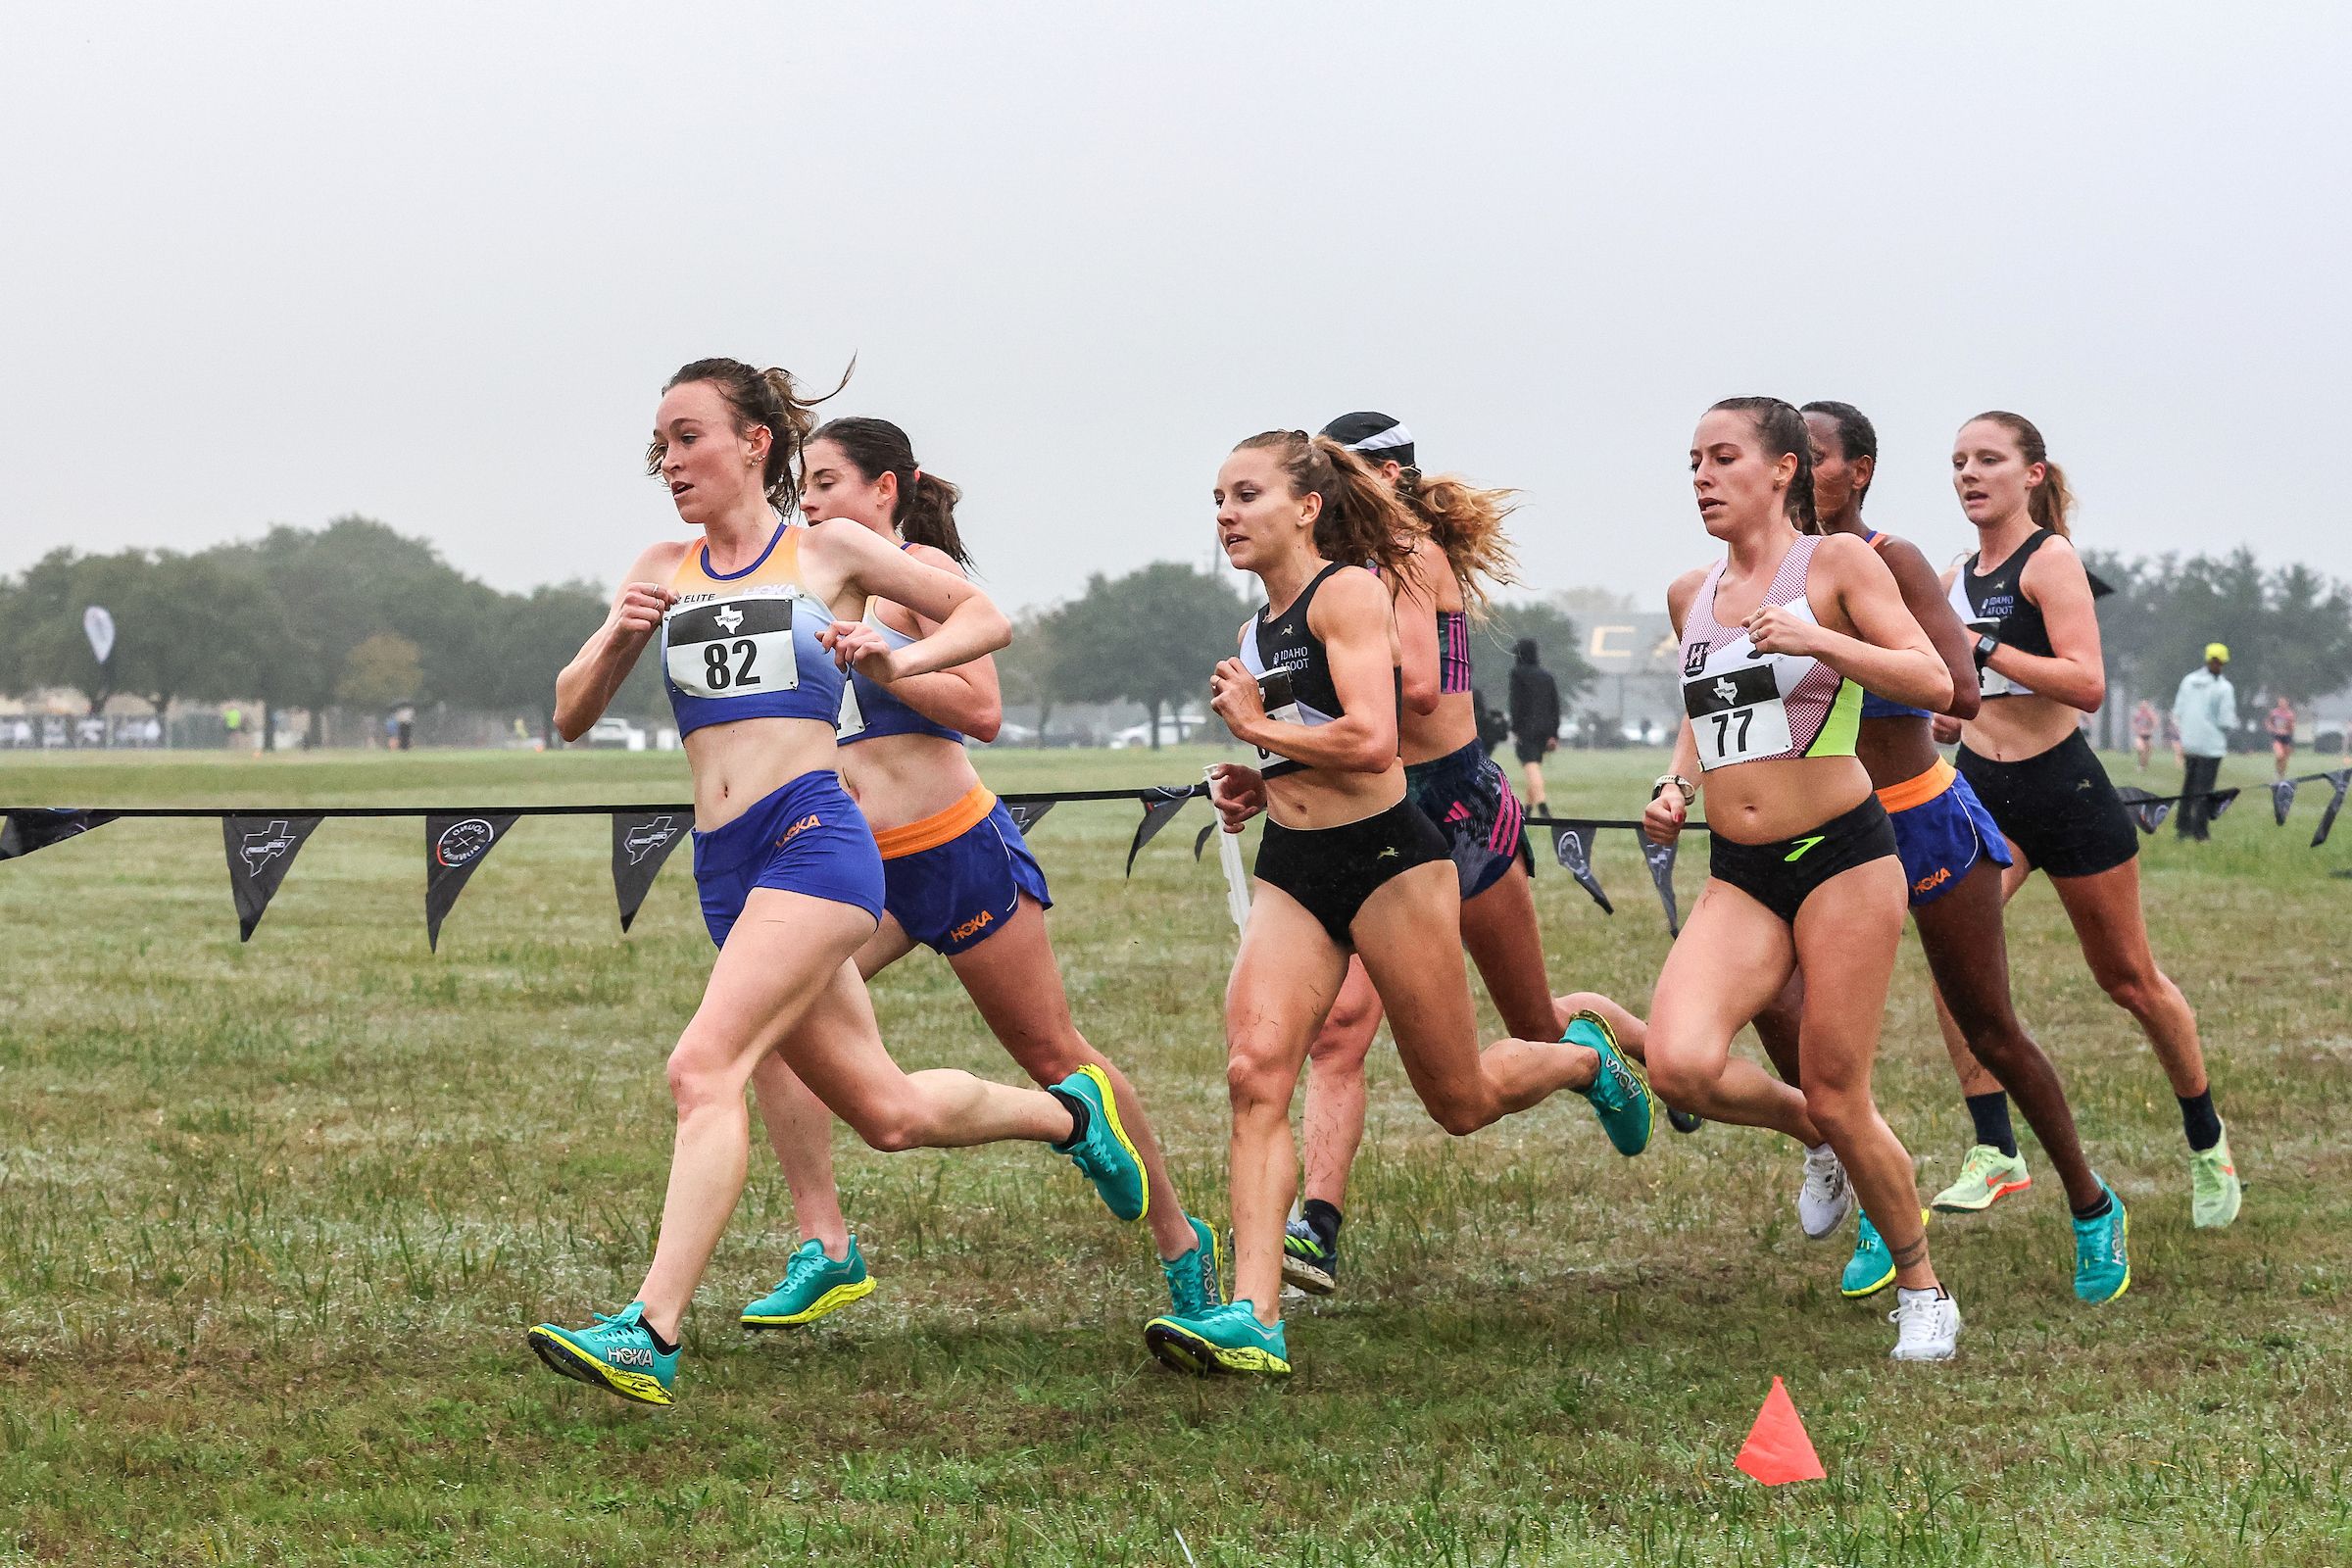 Katie Wasserman (82) leads at the Cross Champs in Austin